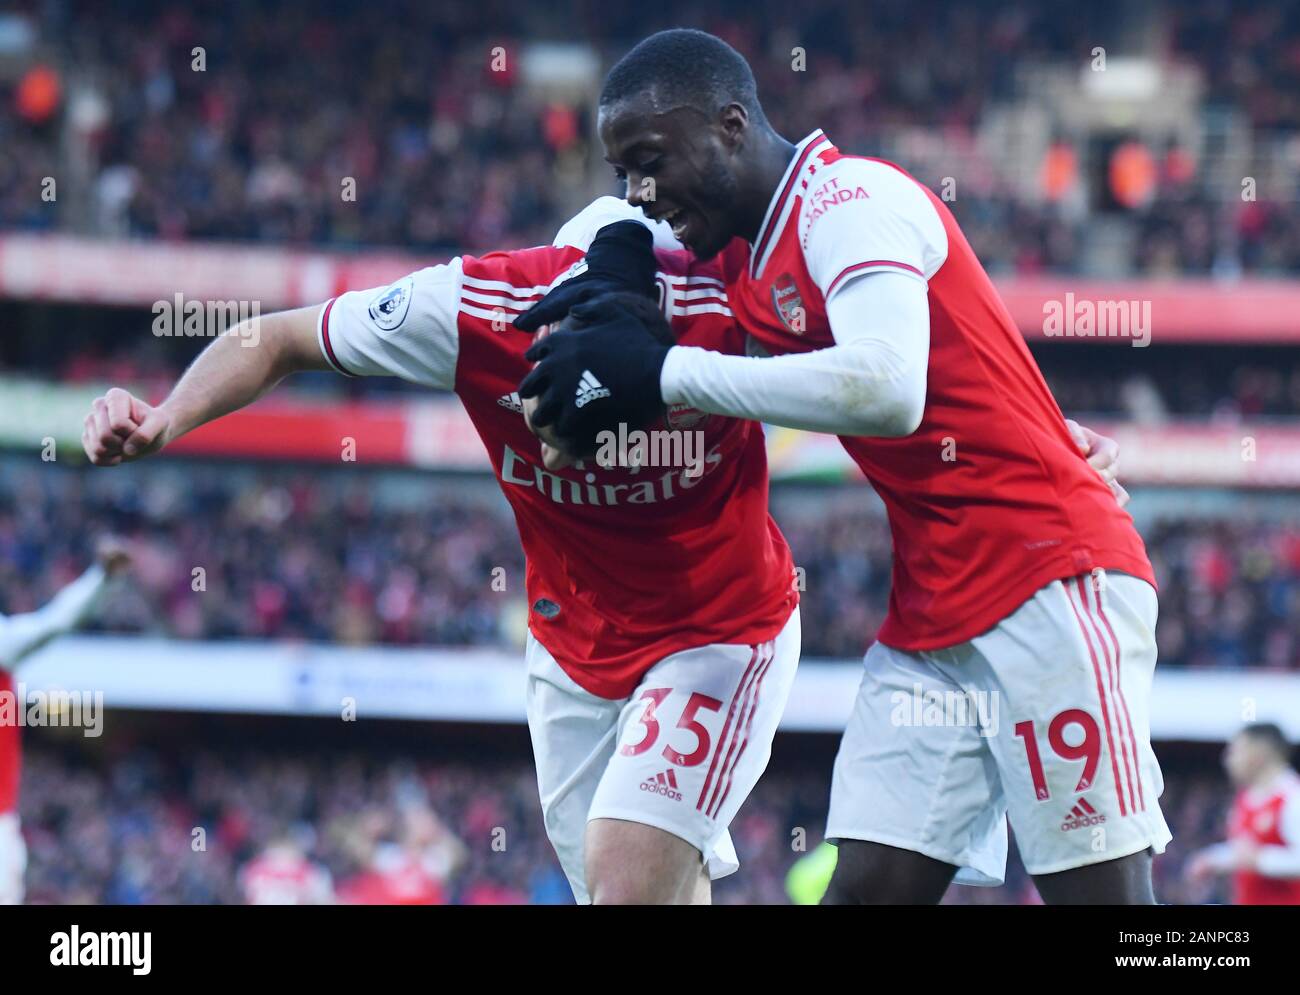 LONDON, ENGLAND - JANUARY 18, 2020: Gabriel Martinelli of Arsenal celebrates Nicolas Pepe of Arsenal after he scored a goal during the 2019/20 Premier League game between Arsenal FC and Sheffield United FC at Emirates Stadium. Stock Photo